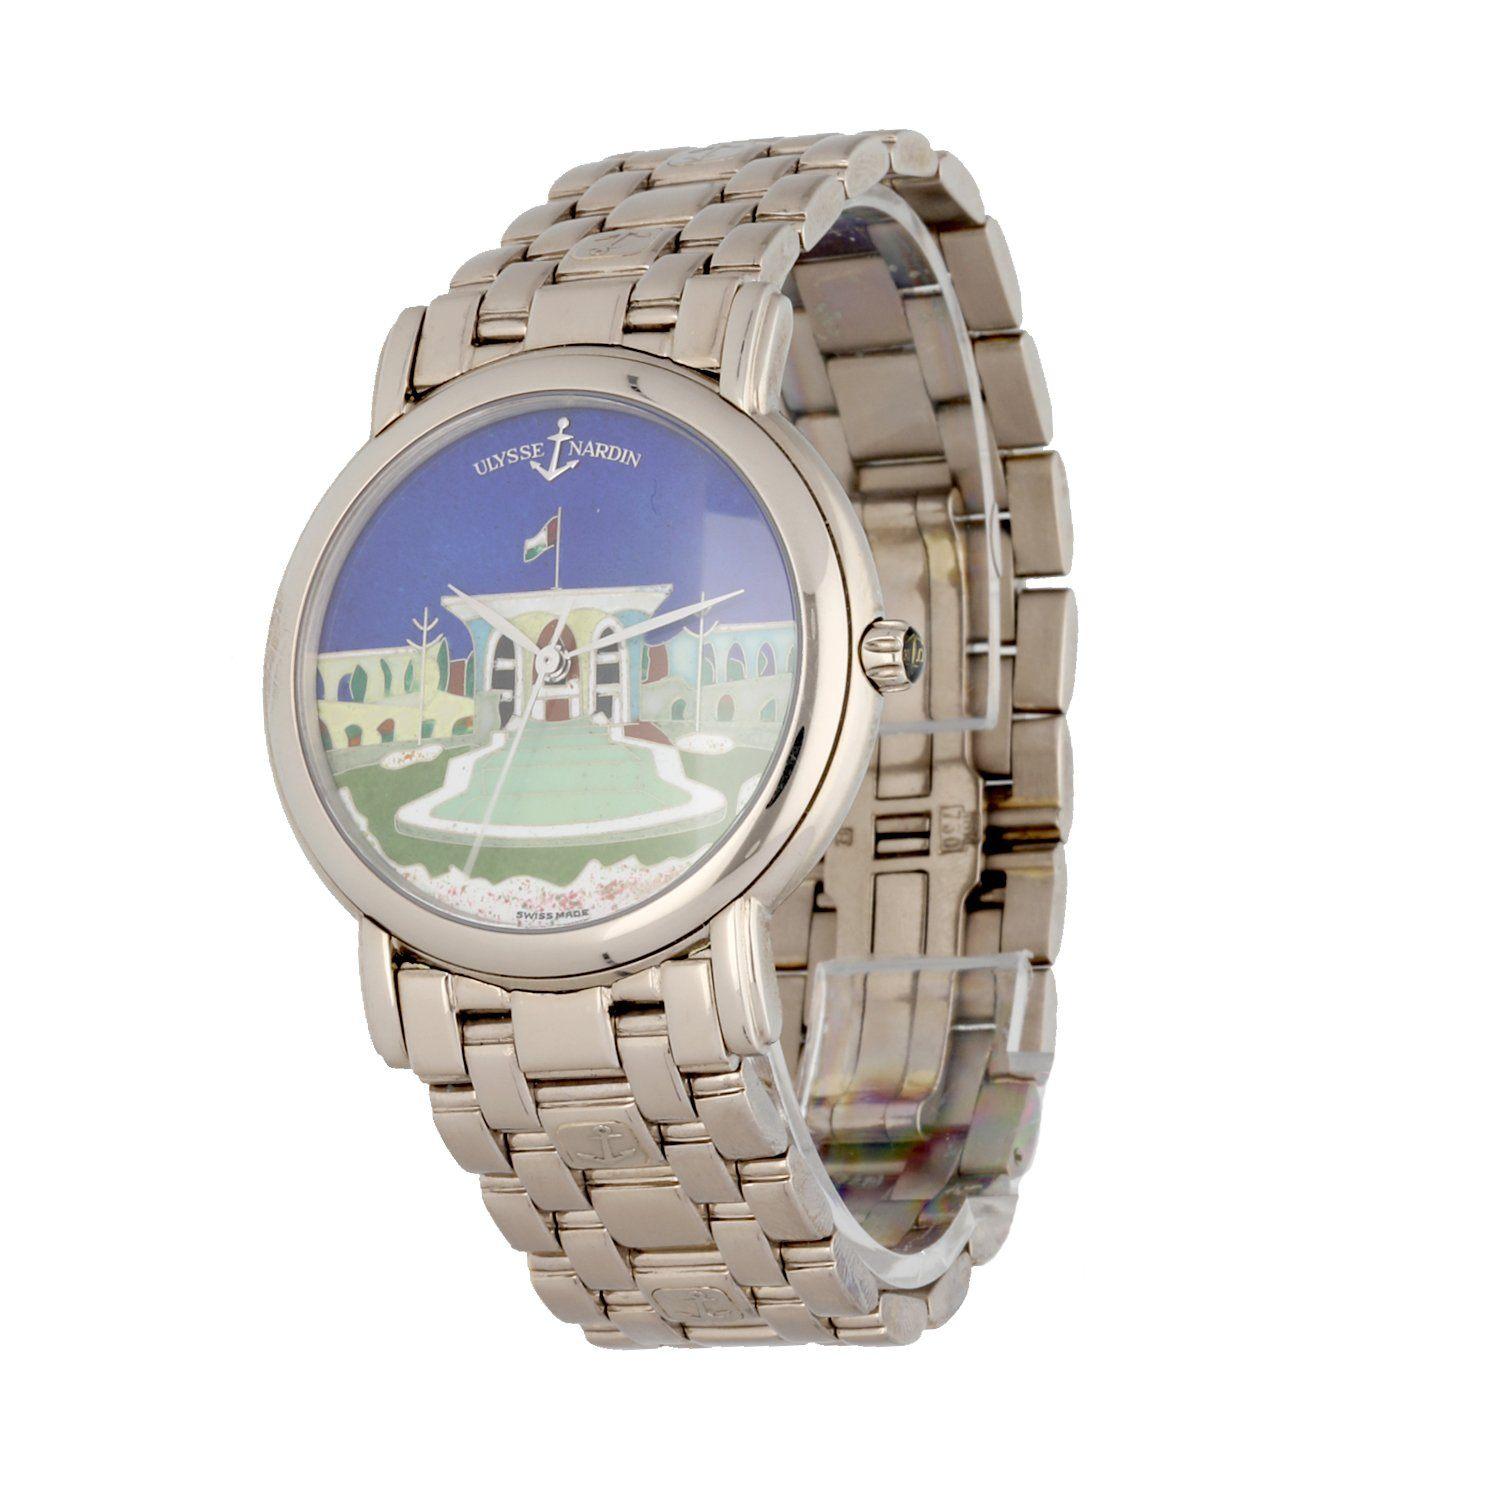 Ulysse Nardin San Marco 130-77-9 men's watch. 37MM 18K white gold case with 18K white gold smooth bezel. Multi color enamel cloisonne dial with white gold hands. Rare and solid 18K white goldÂ Ulysse Nardin's removable bracelet with 18K white gold